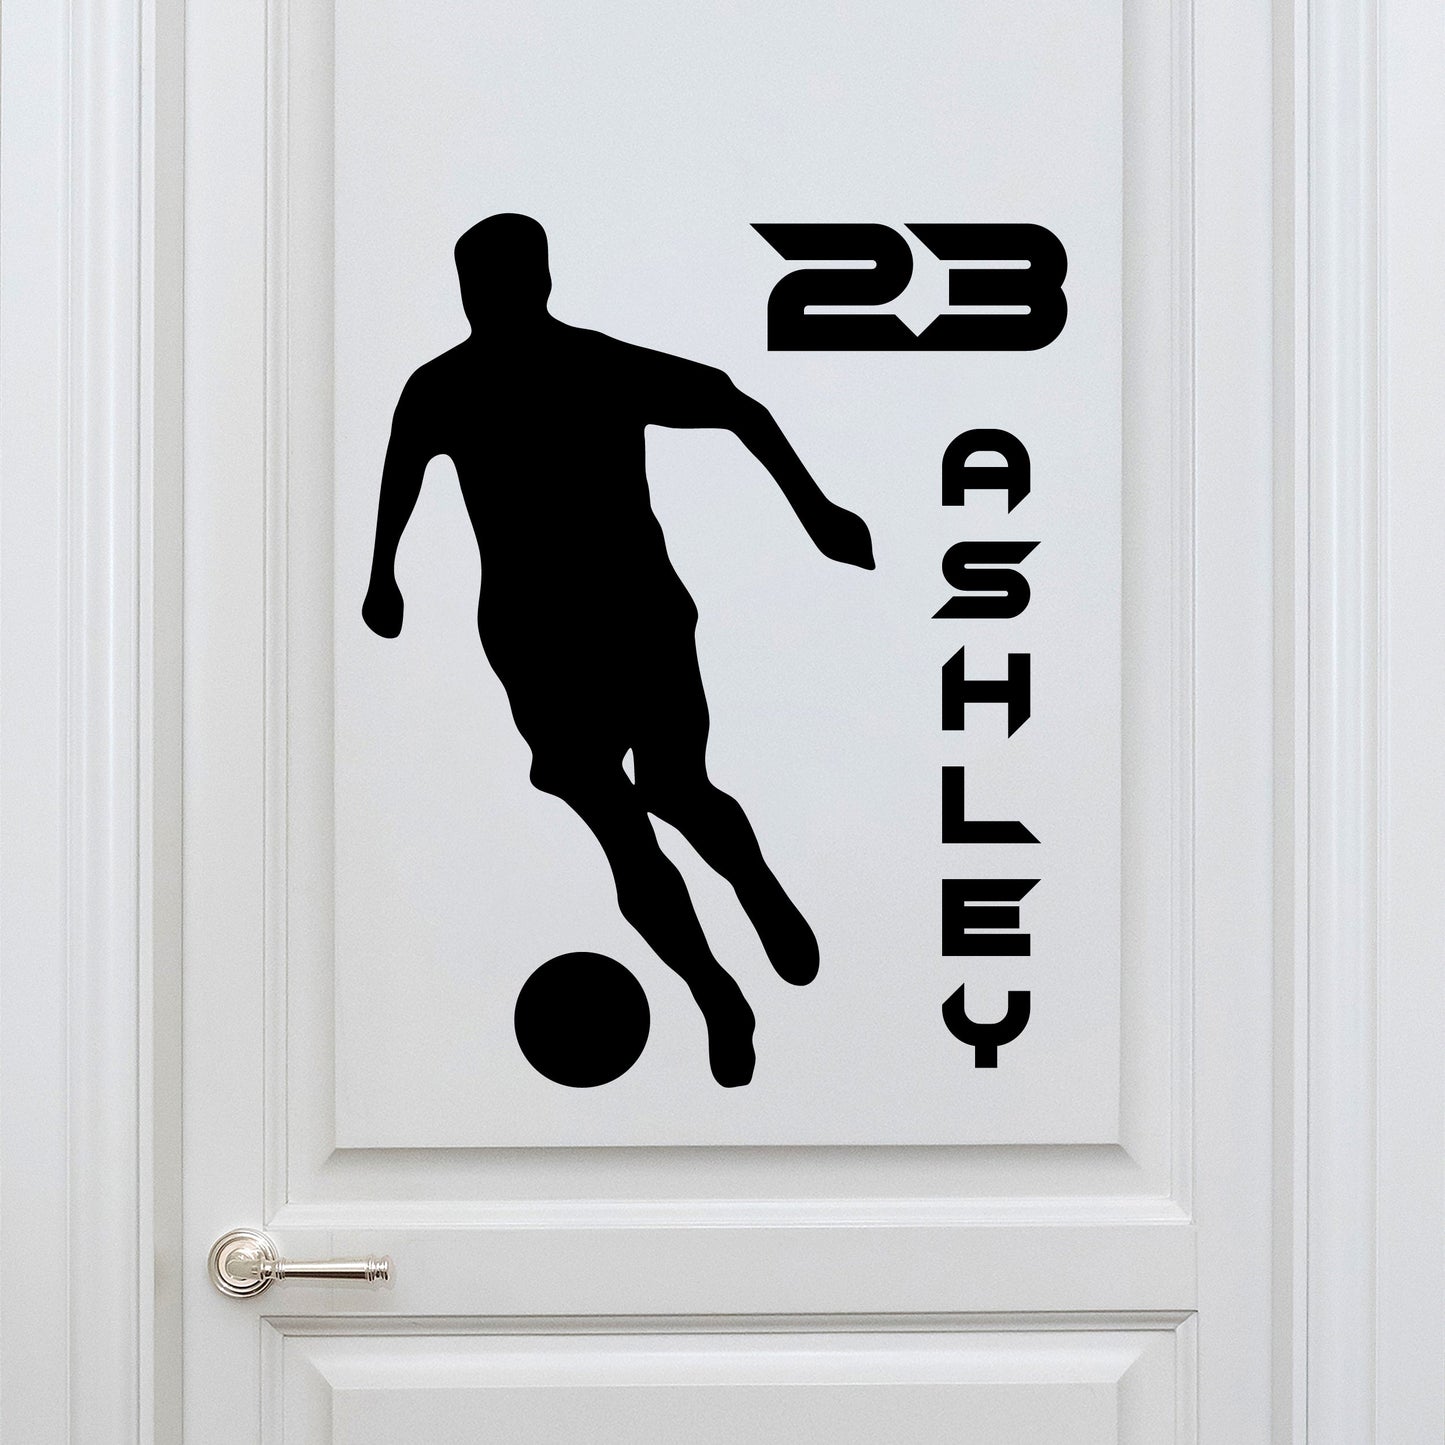 Soccer Wall Decal - Personalized Custom Vinyl Wall Decal Soccer - Large Soccer Player Wall Decal - Soccer Fathead Wall Decals